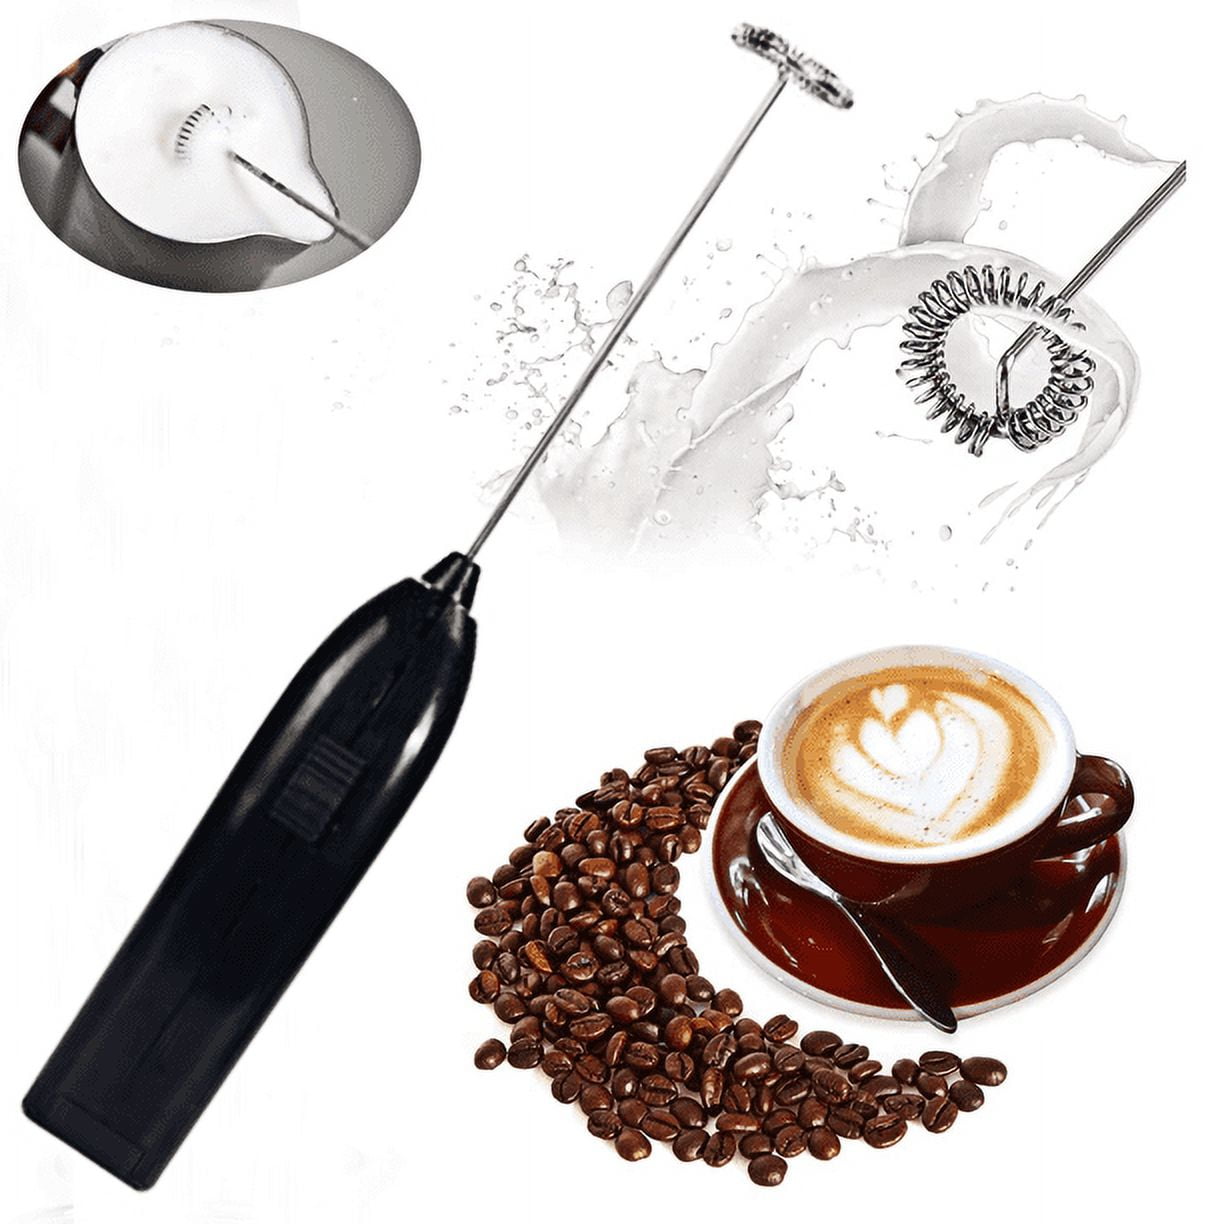 Milk Frother Complete Set Coffee Gift, Handheld Foam Maker for Lattes - White